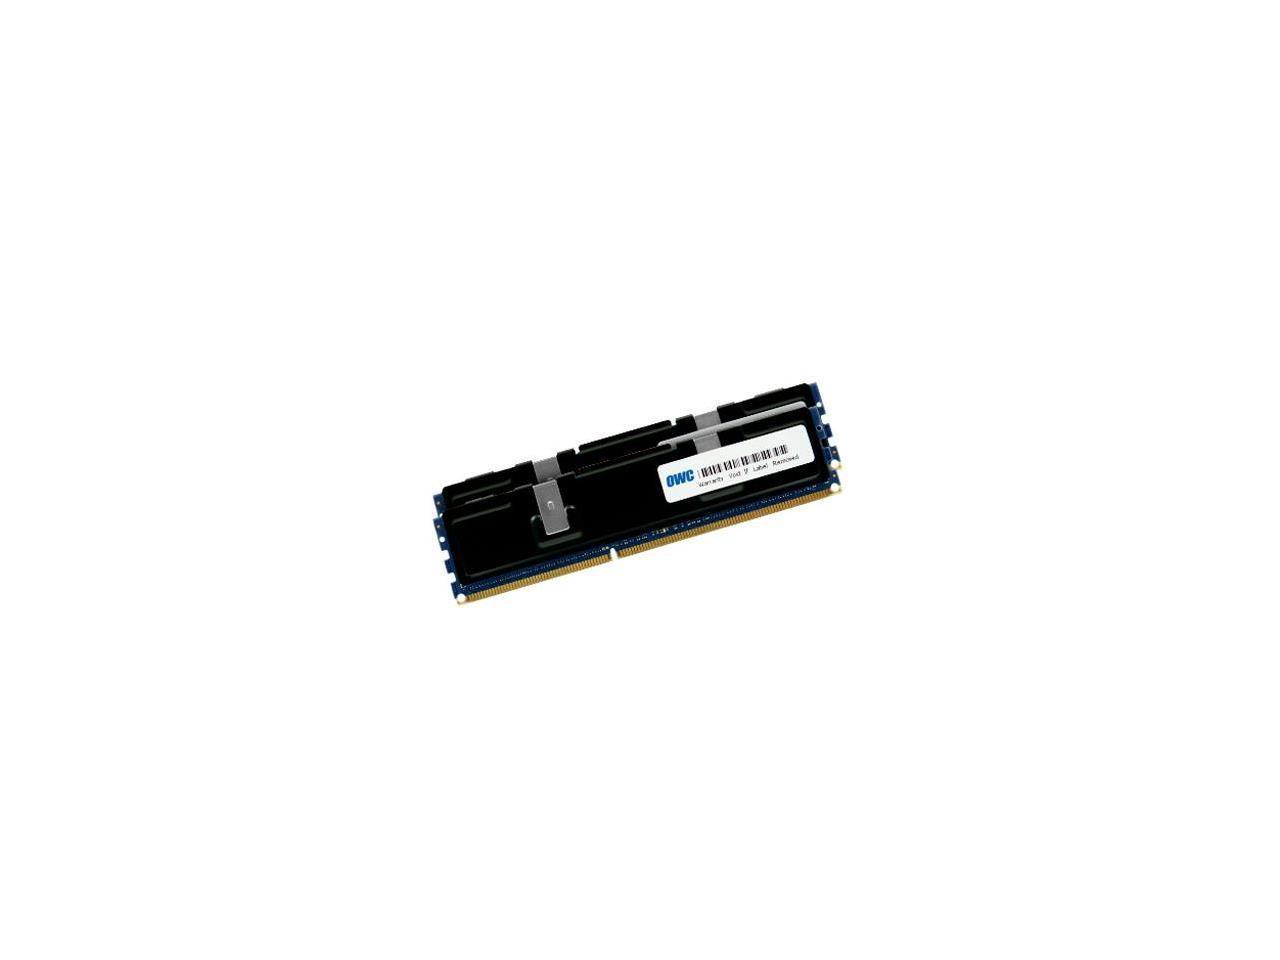 OWC 32GB ( 2x16GB ) PC3-10600 DDR3 ECC 1333MHz SDRAM DIMM 240 Pin Memory Upgrade kit For Mac Pro 'Nehalem' & 'Westmere' models.Perfect For the Mac Pro 8-core and Quad-core Xeon systems.OWC1333D3X9M032